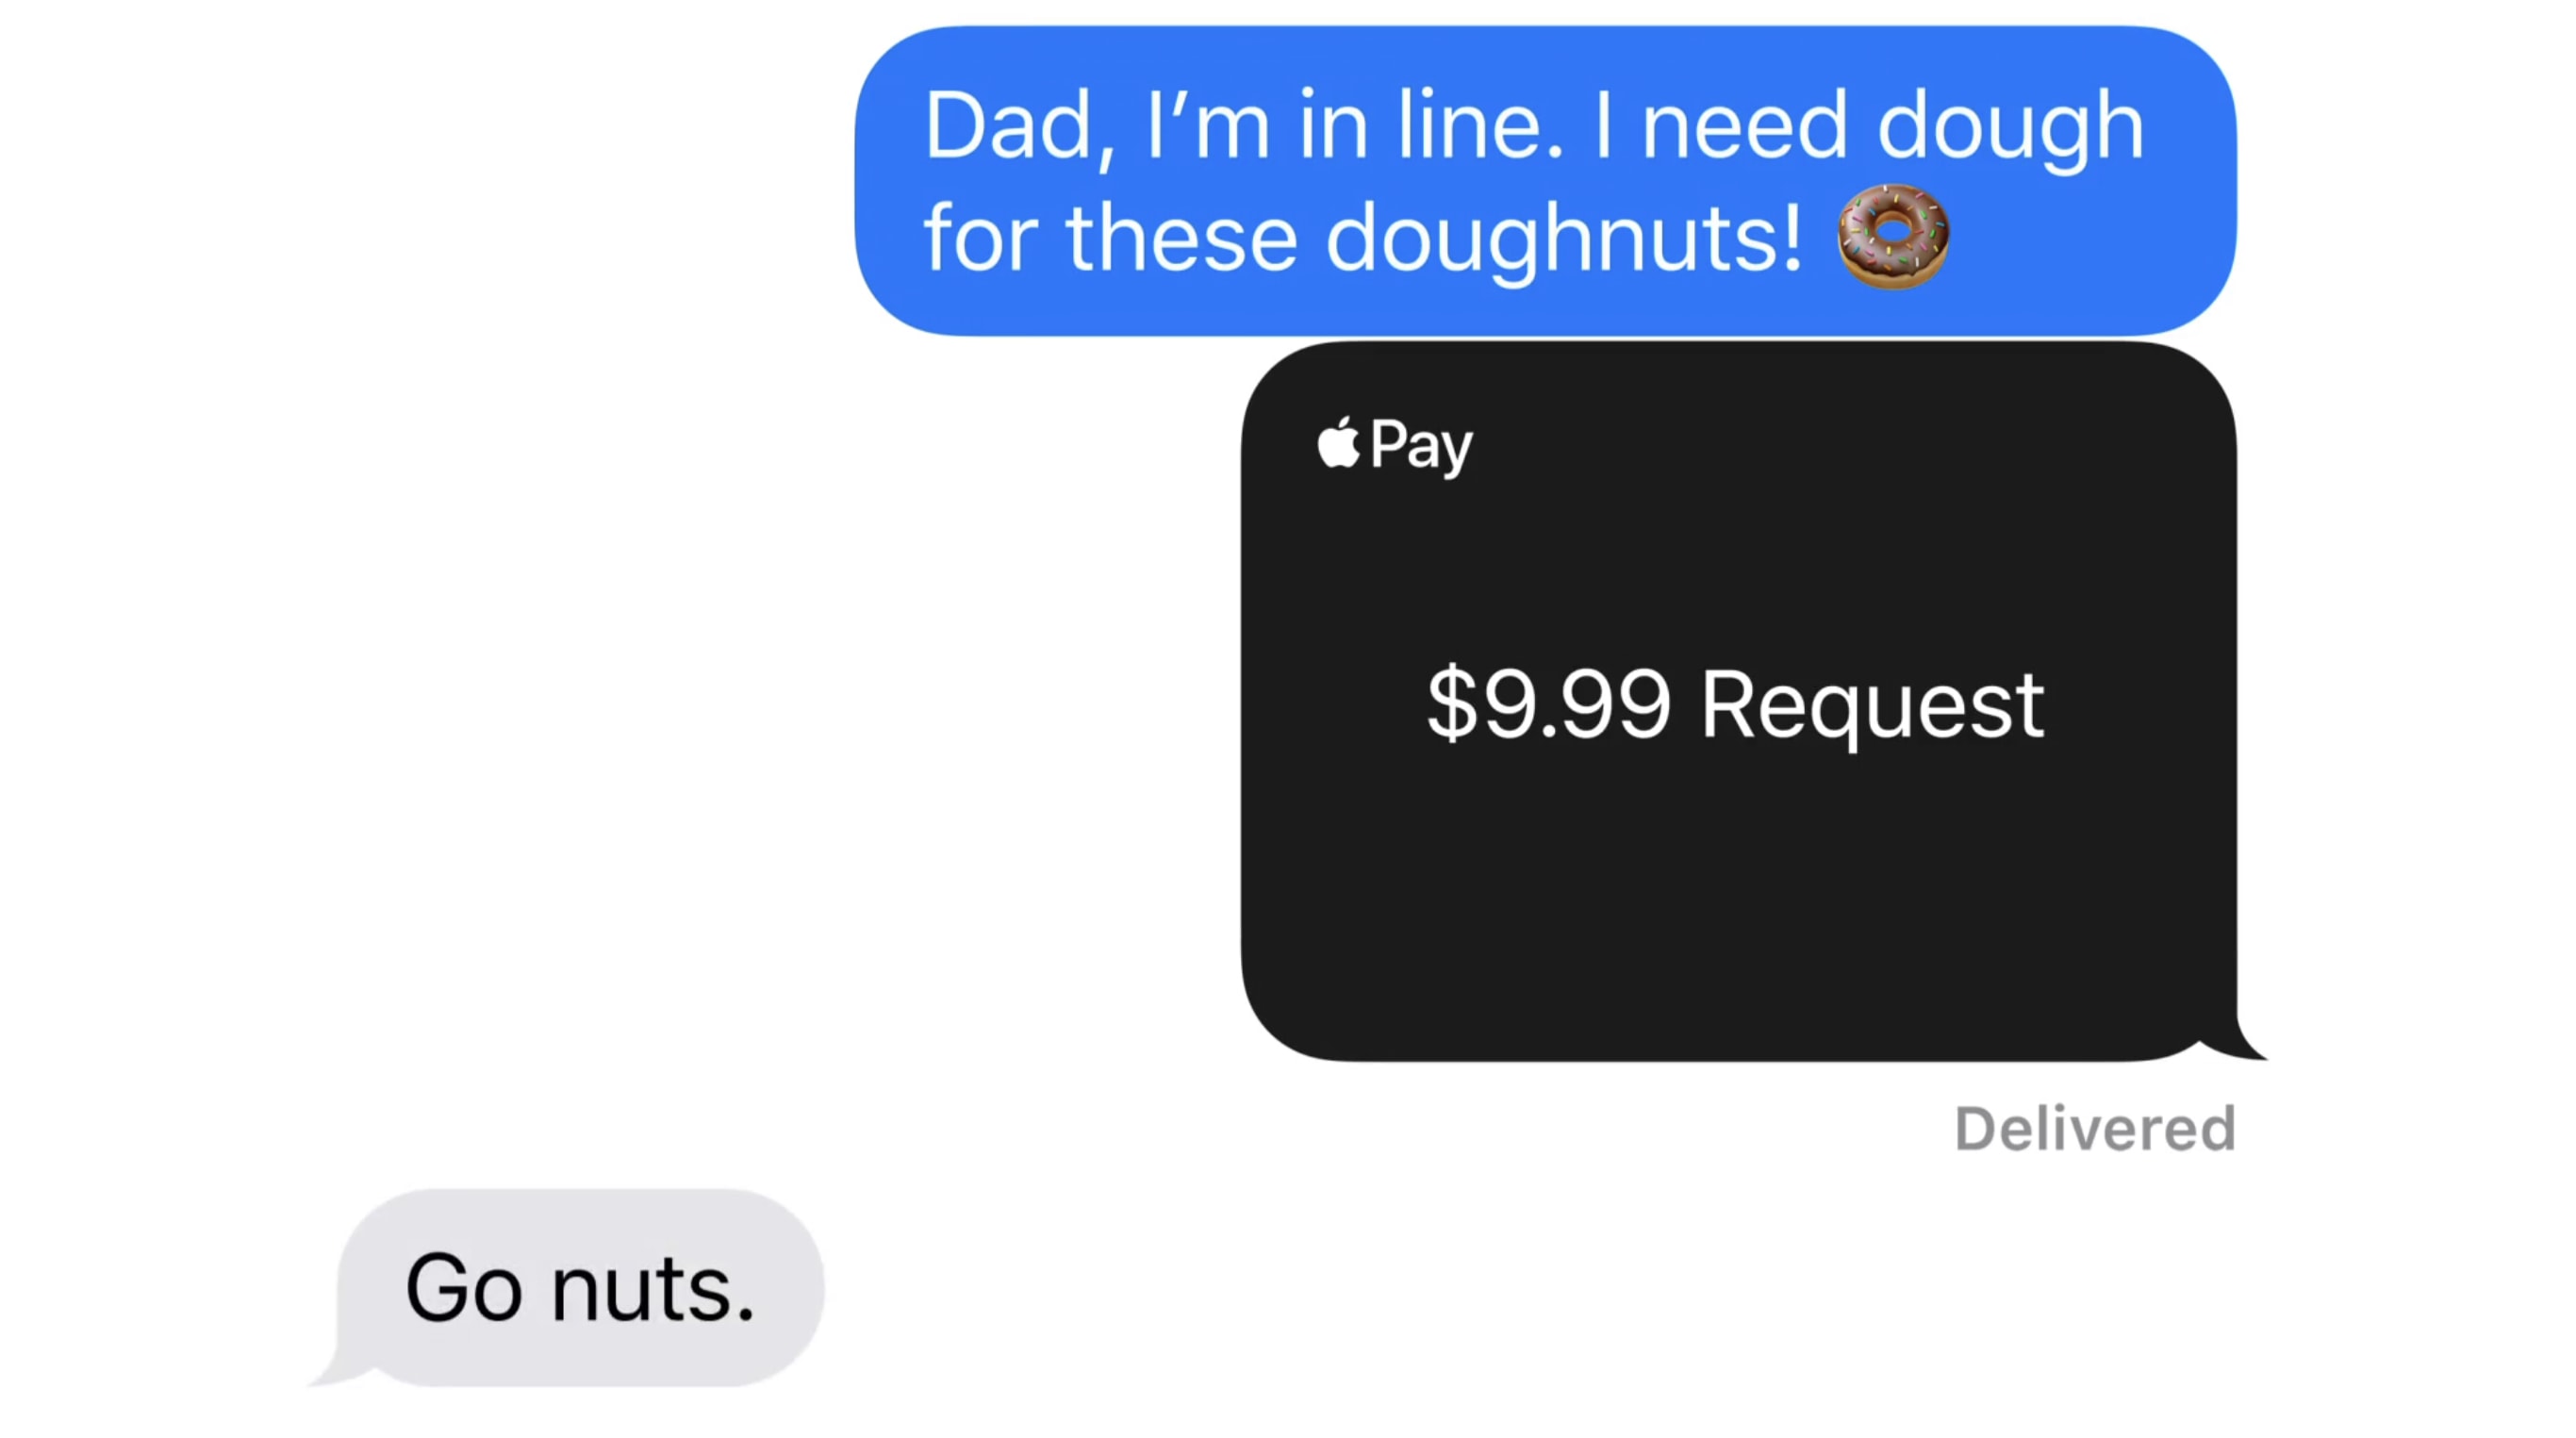 Pay for your doughnut dash with help from Apple Pay.